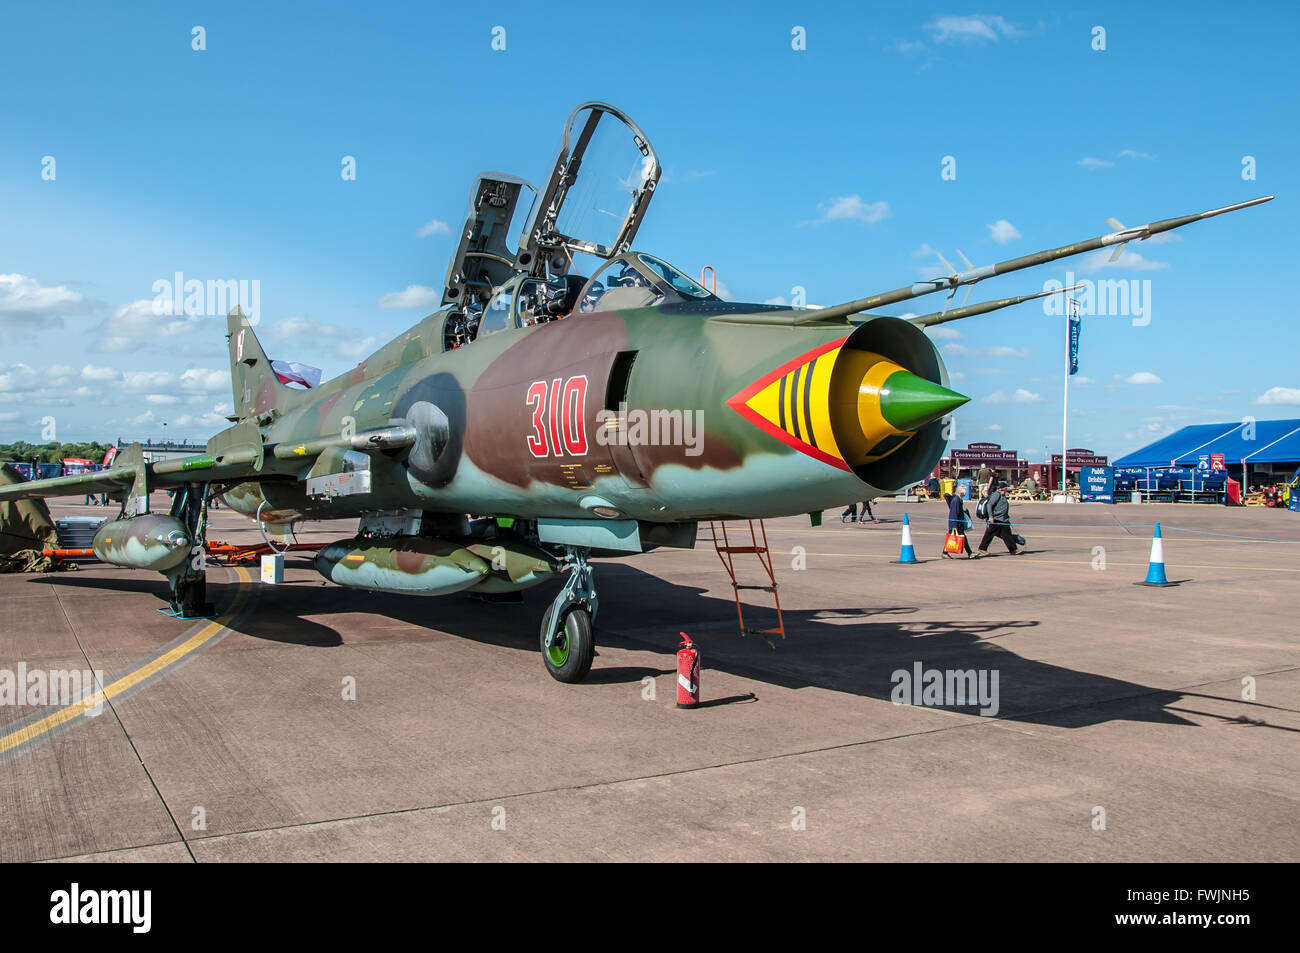 A Polish Air Force Sukhoi Su-22 Fitter vintage Soviet jet fighter plane at the Royal International Air Tattoo 2015. Display aircraft Stock Photo